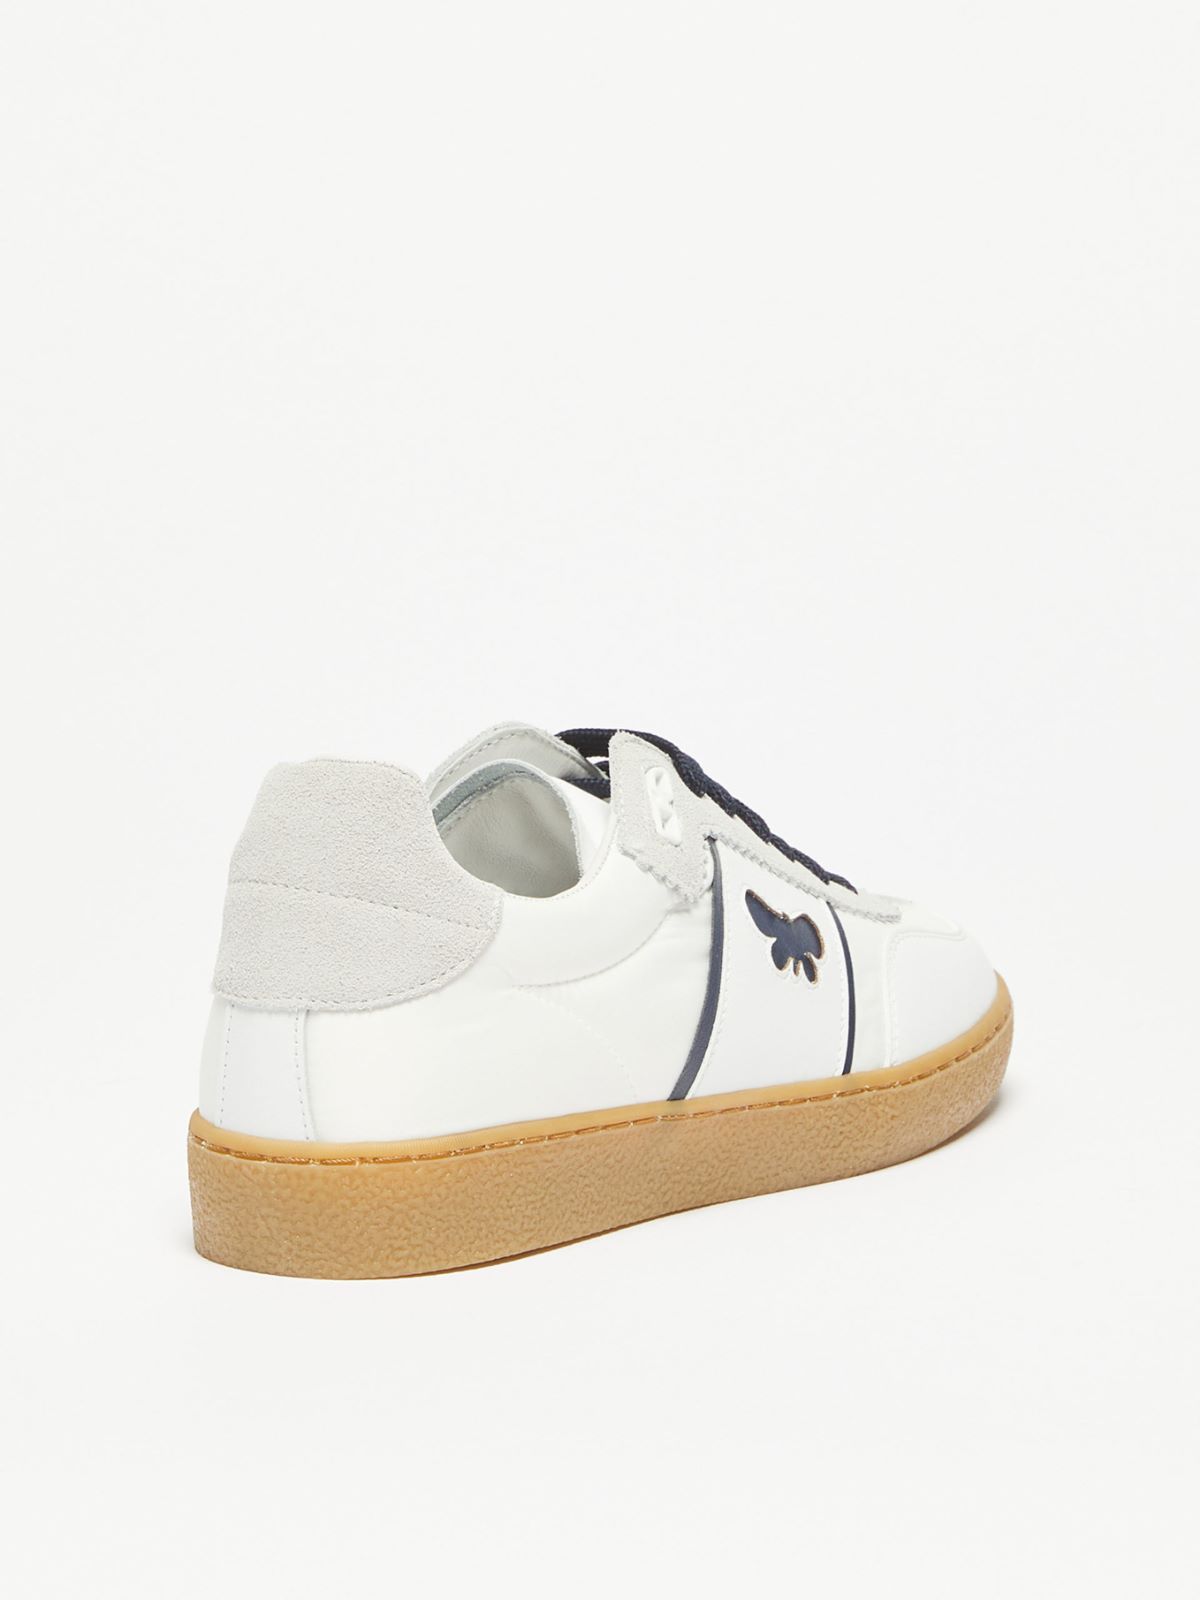 Trainers in technical fabric and leather - WHITE - Weekend Max Mara - 3